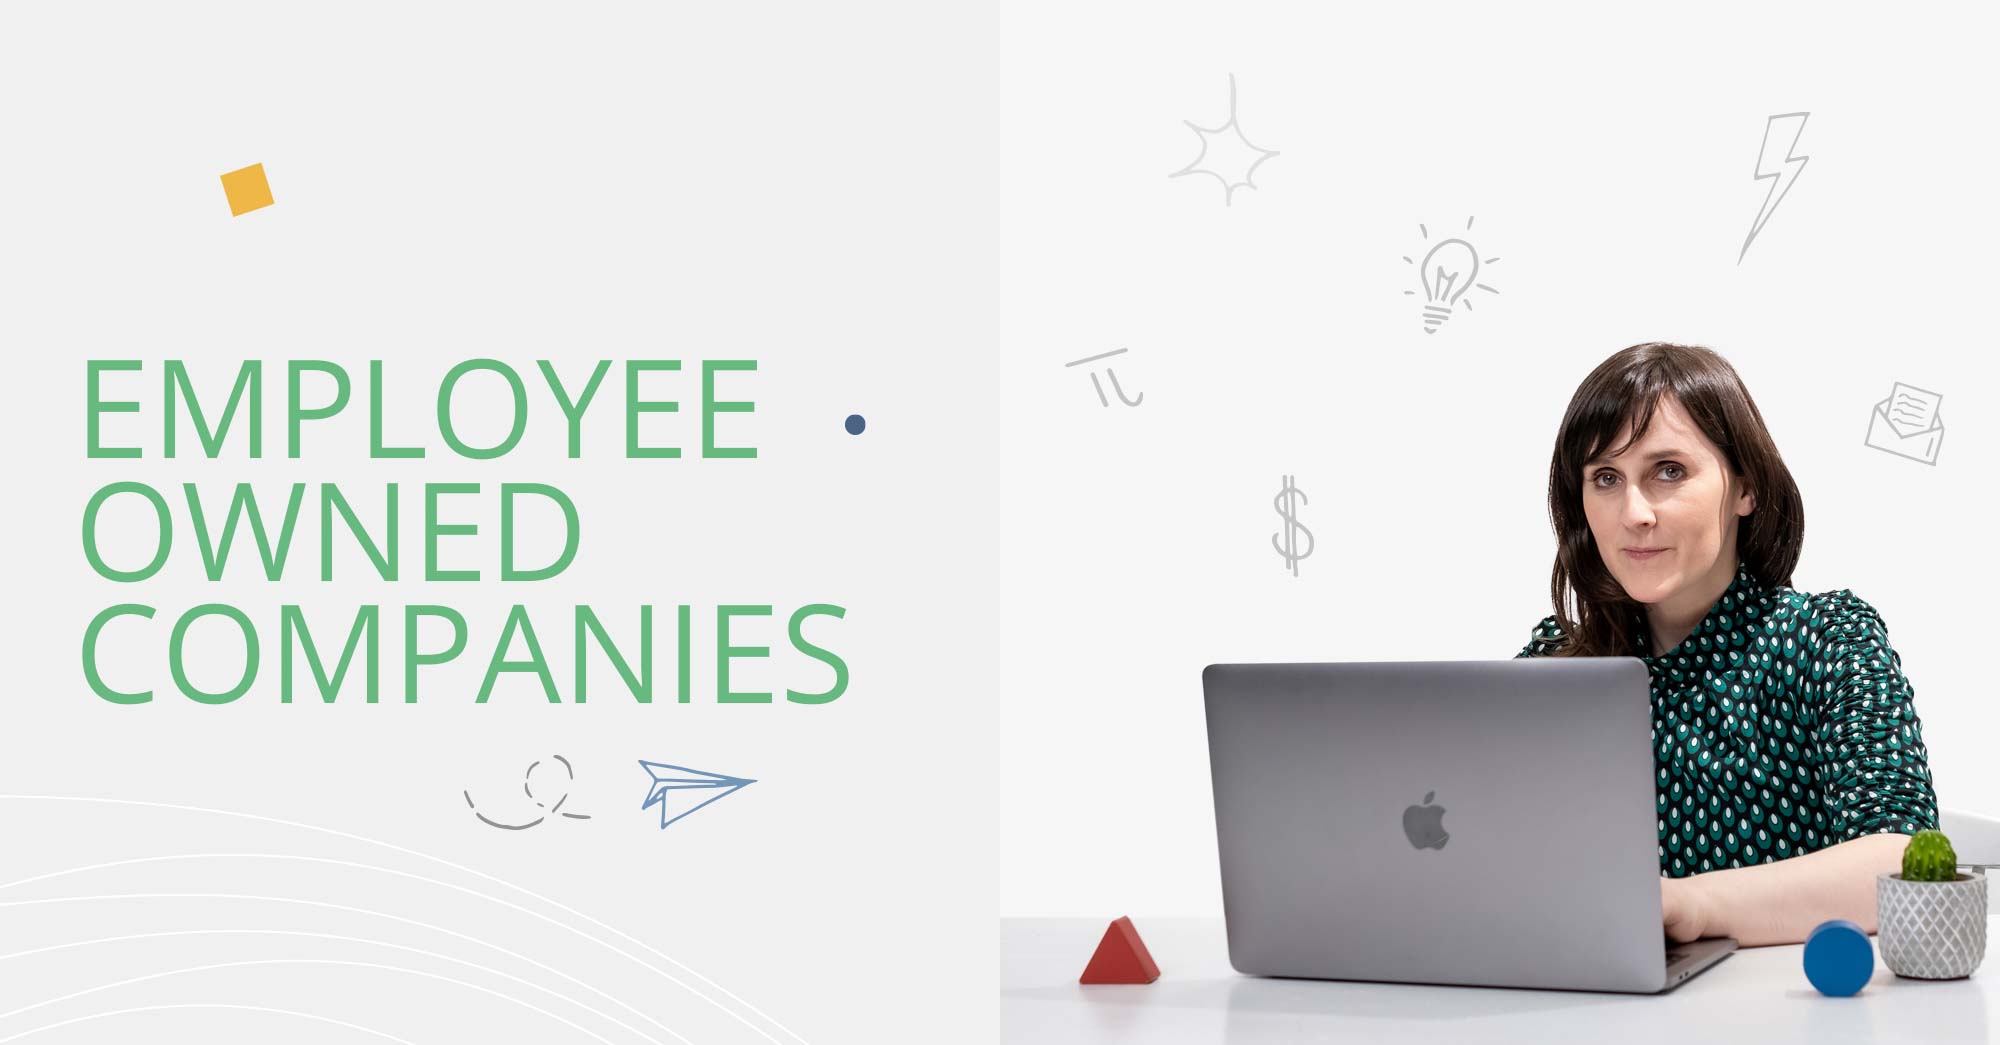 The world needs more employee owned companies